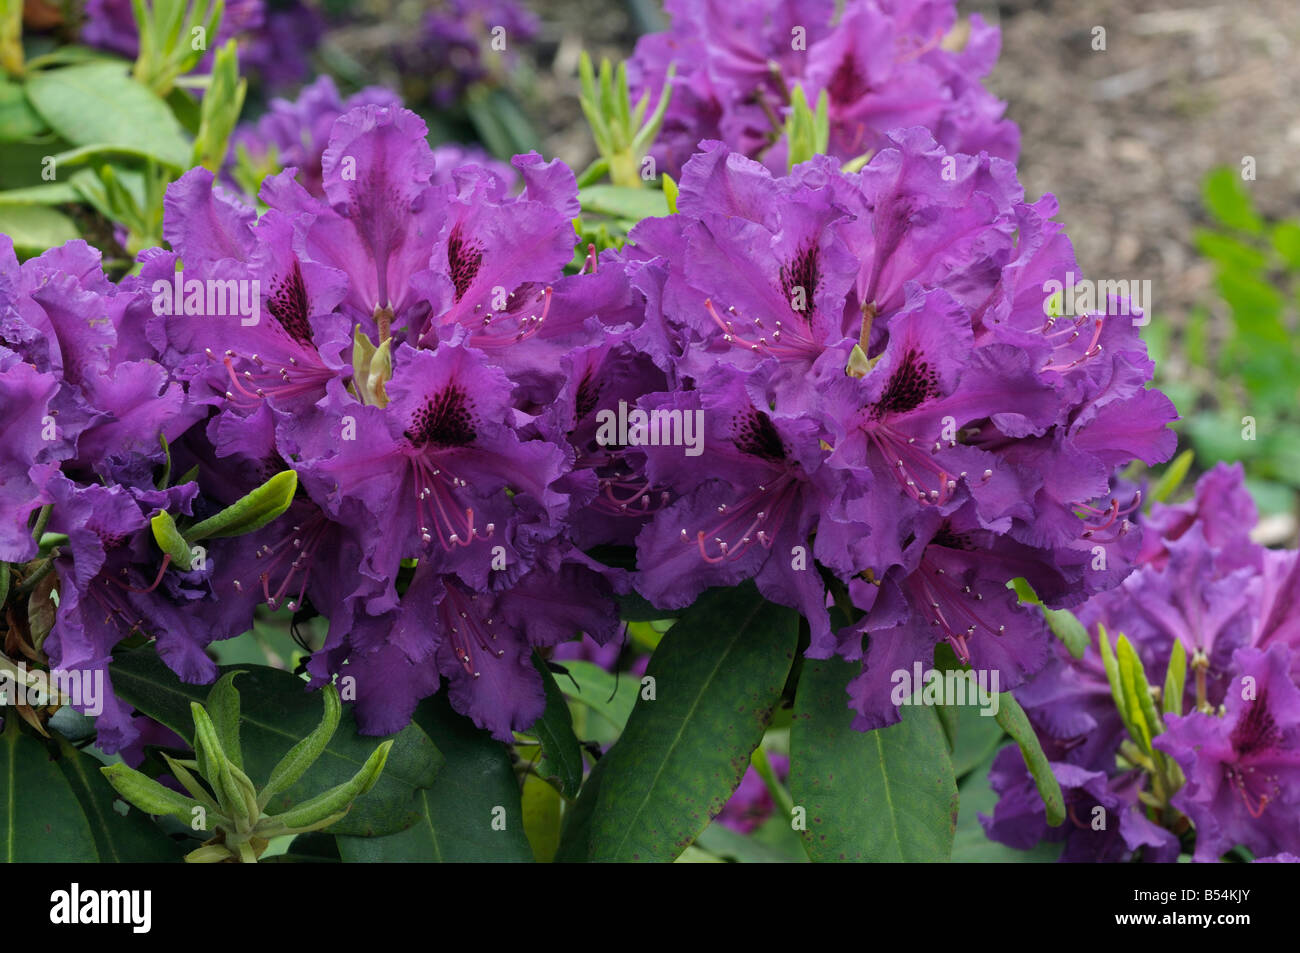 Rhododendron (Rhododendron hybrid), variety: Azurro, flowers Stock Photo